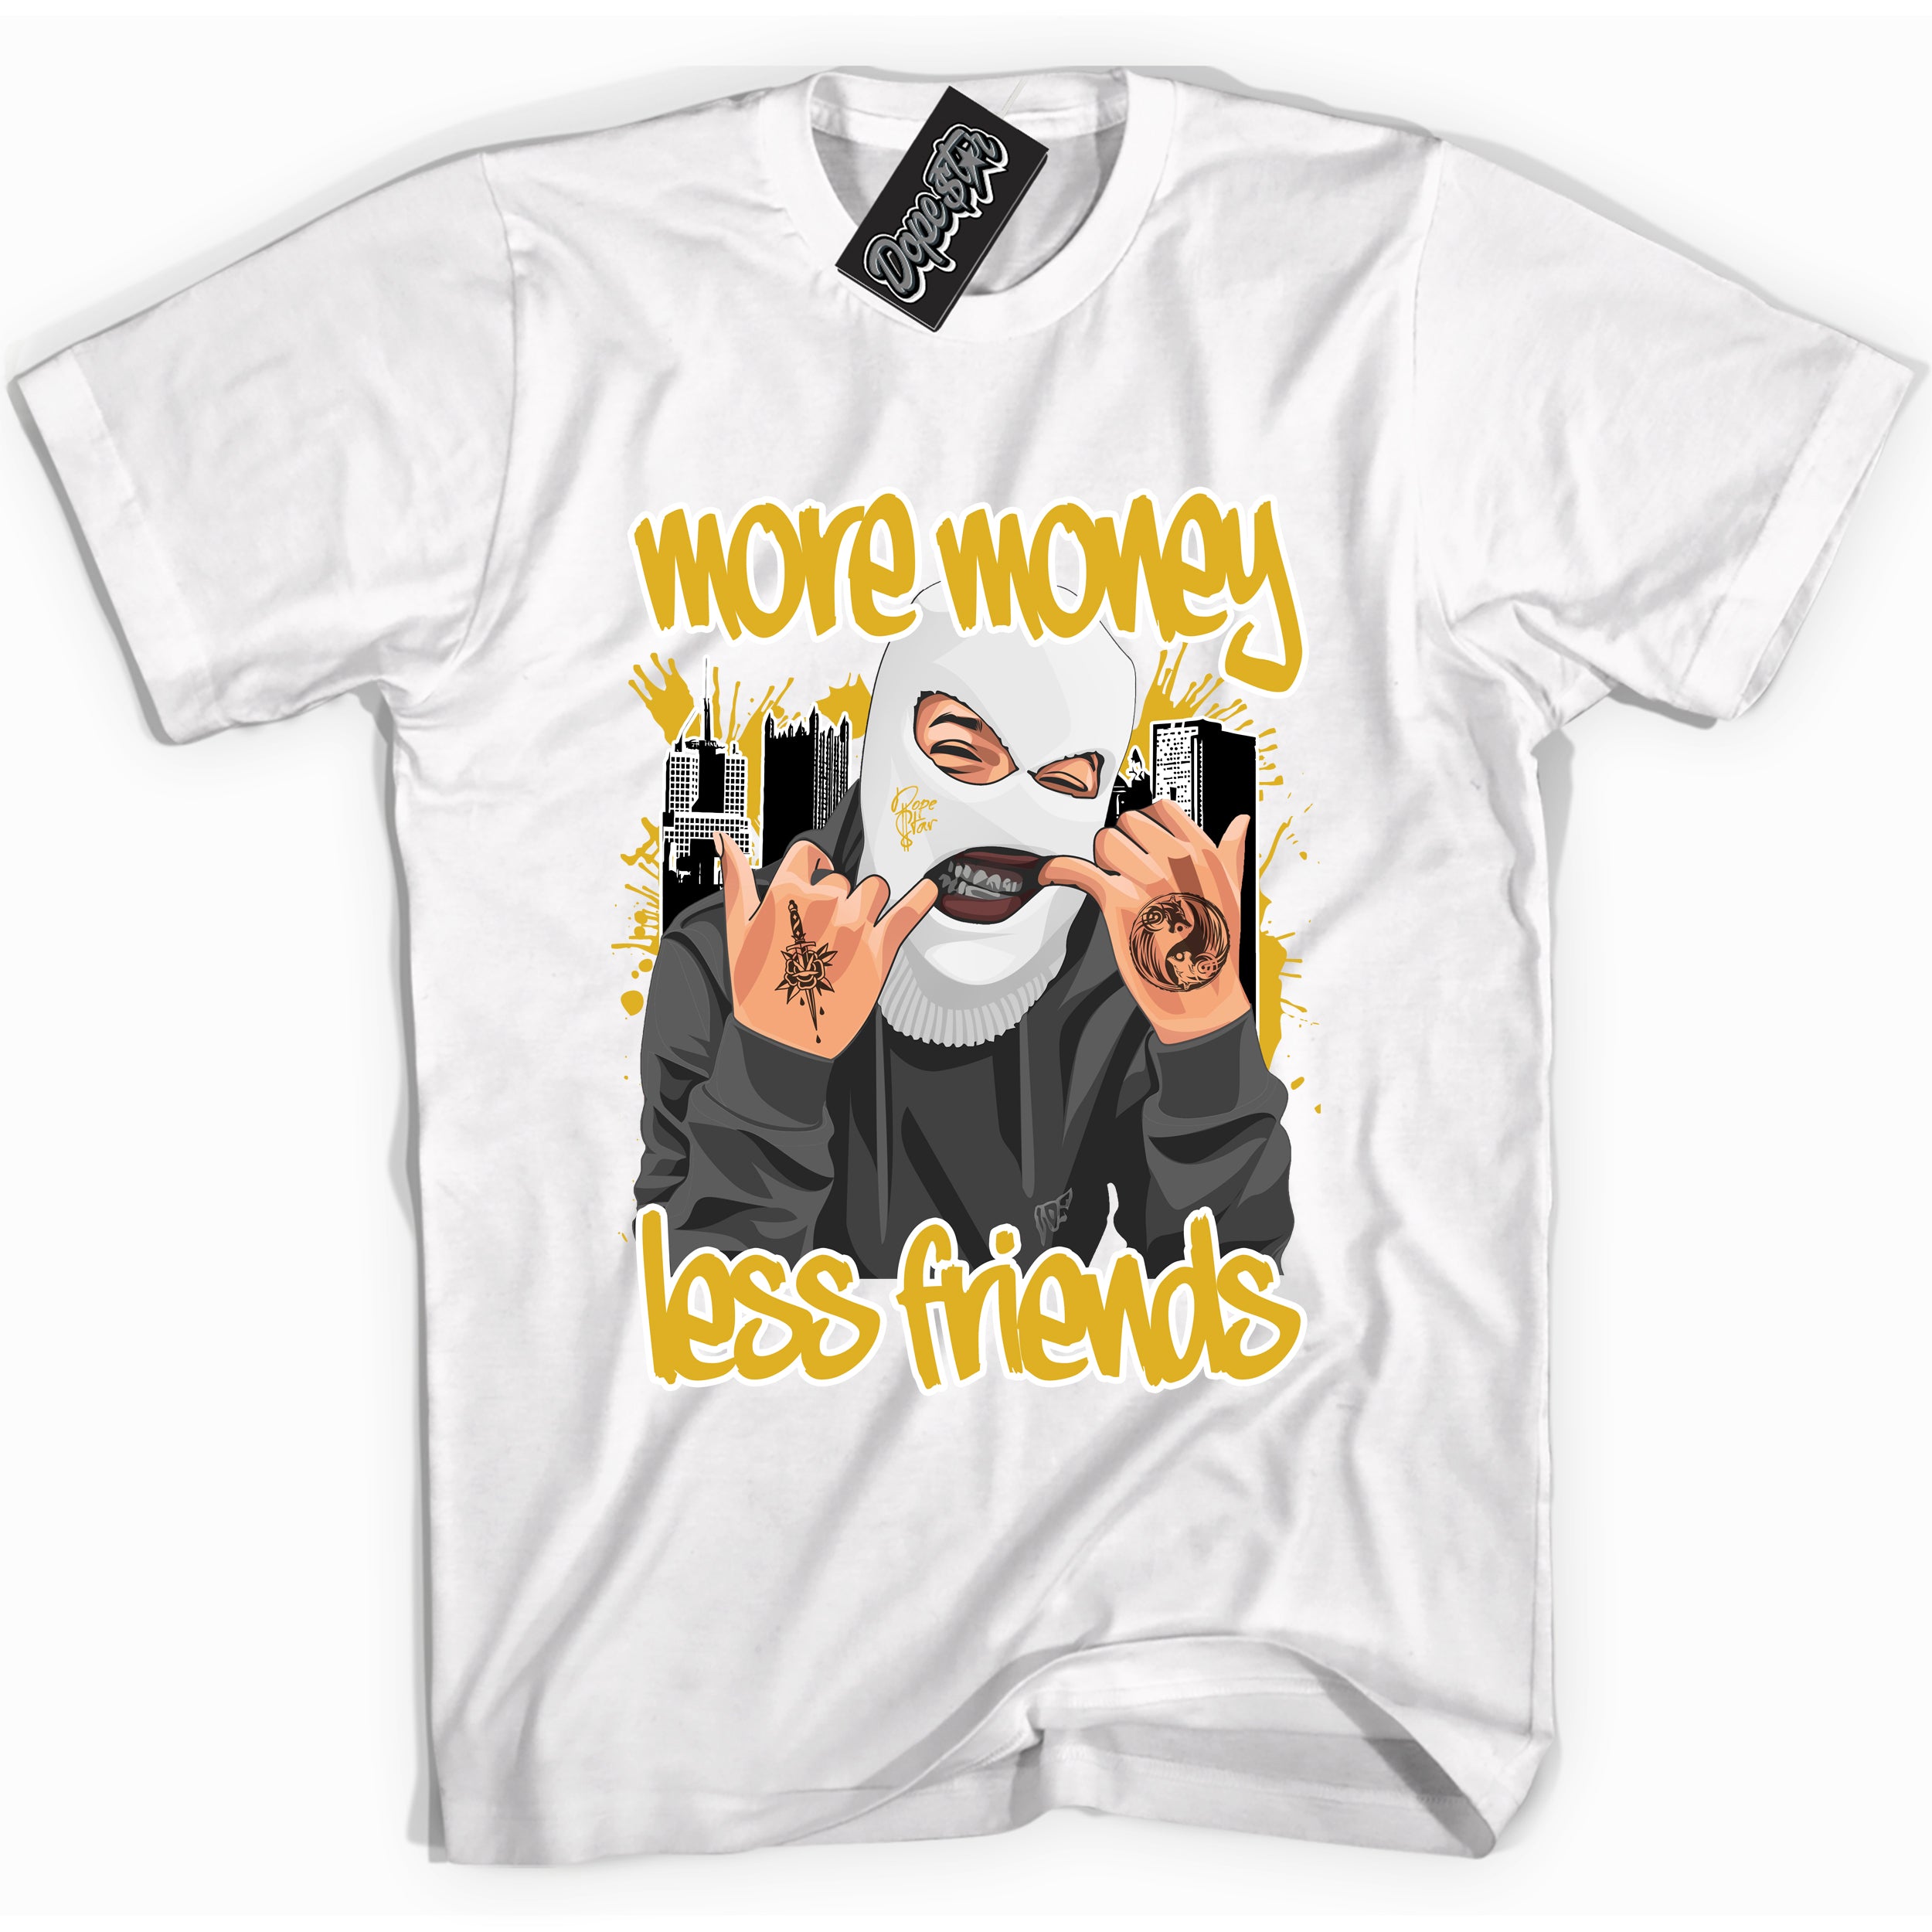 Cool white Shirt with “ More Money Less Friends ” design that perfectly matches Yellow Ochre 6s Sneakers.